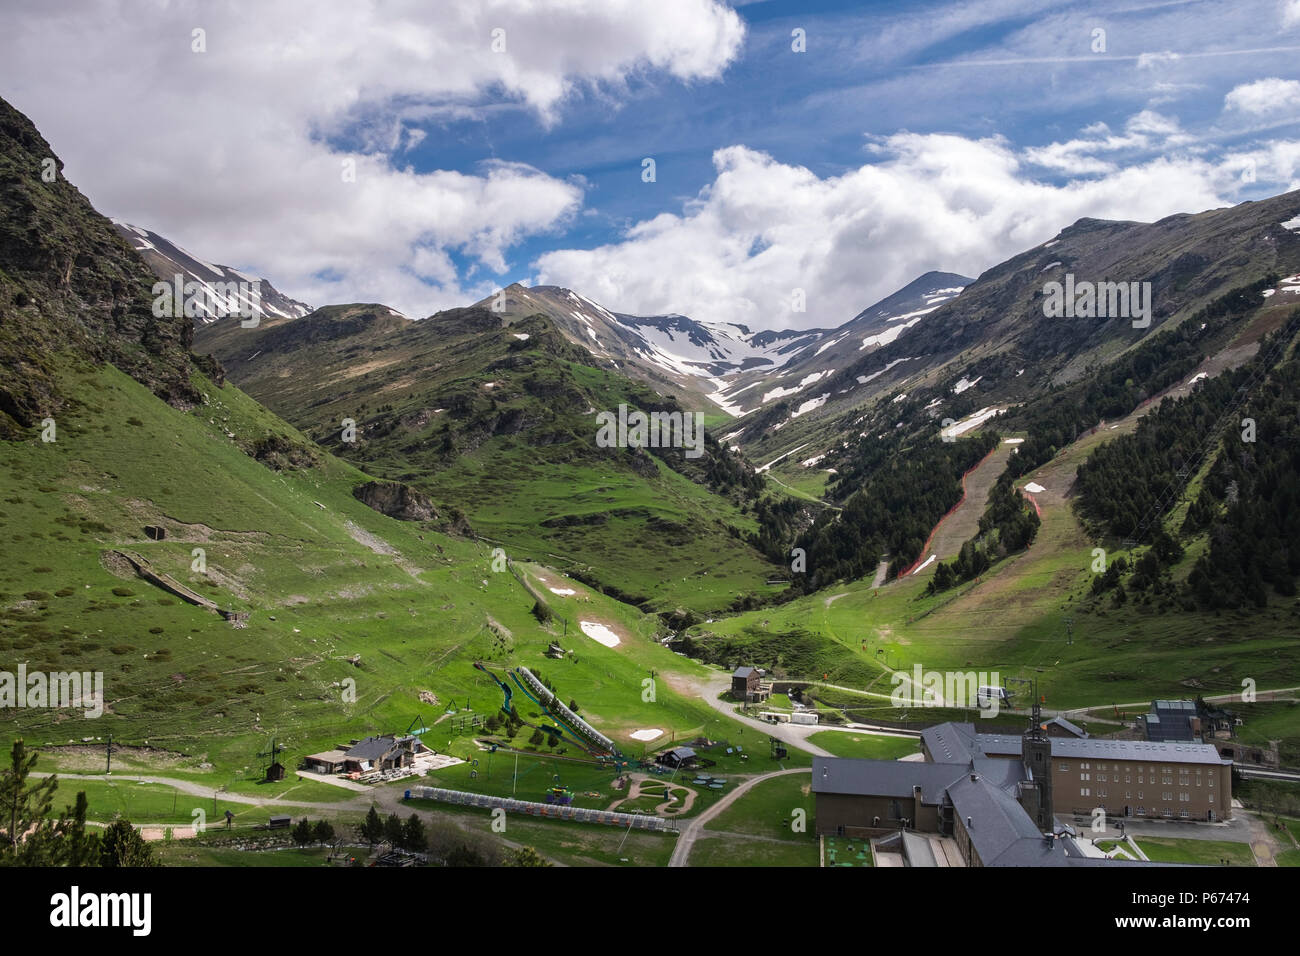 Views over the Vall de Nuria valley in the Pyreneean mountains, Catalonia, Spain Stock Photo